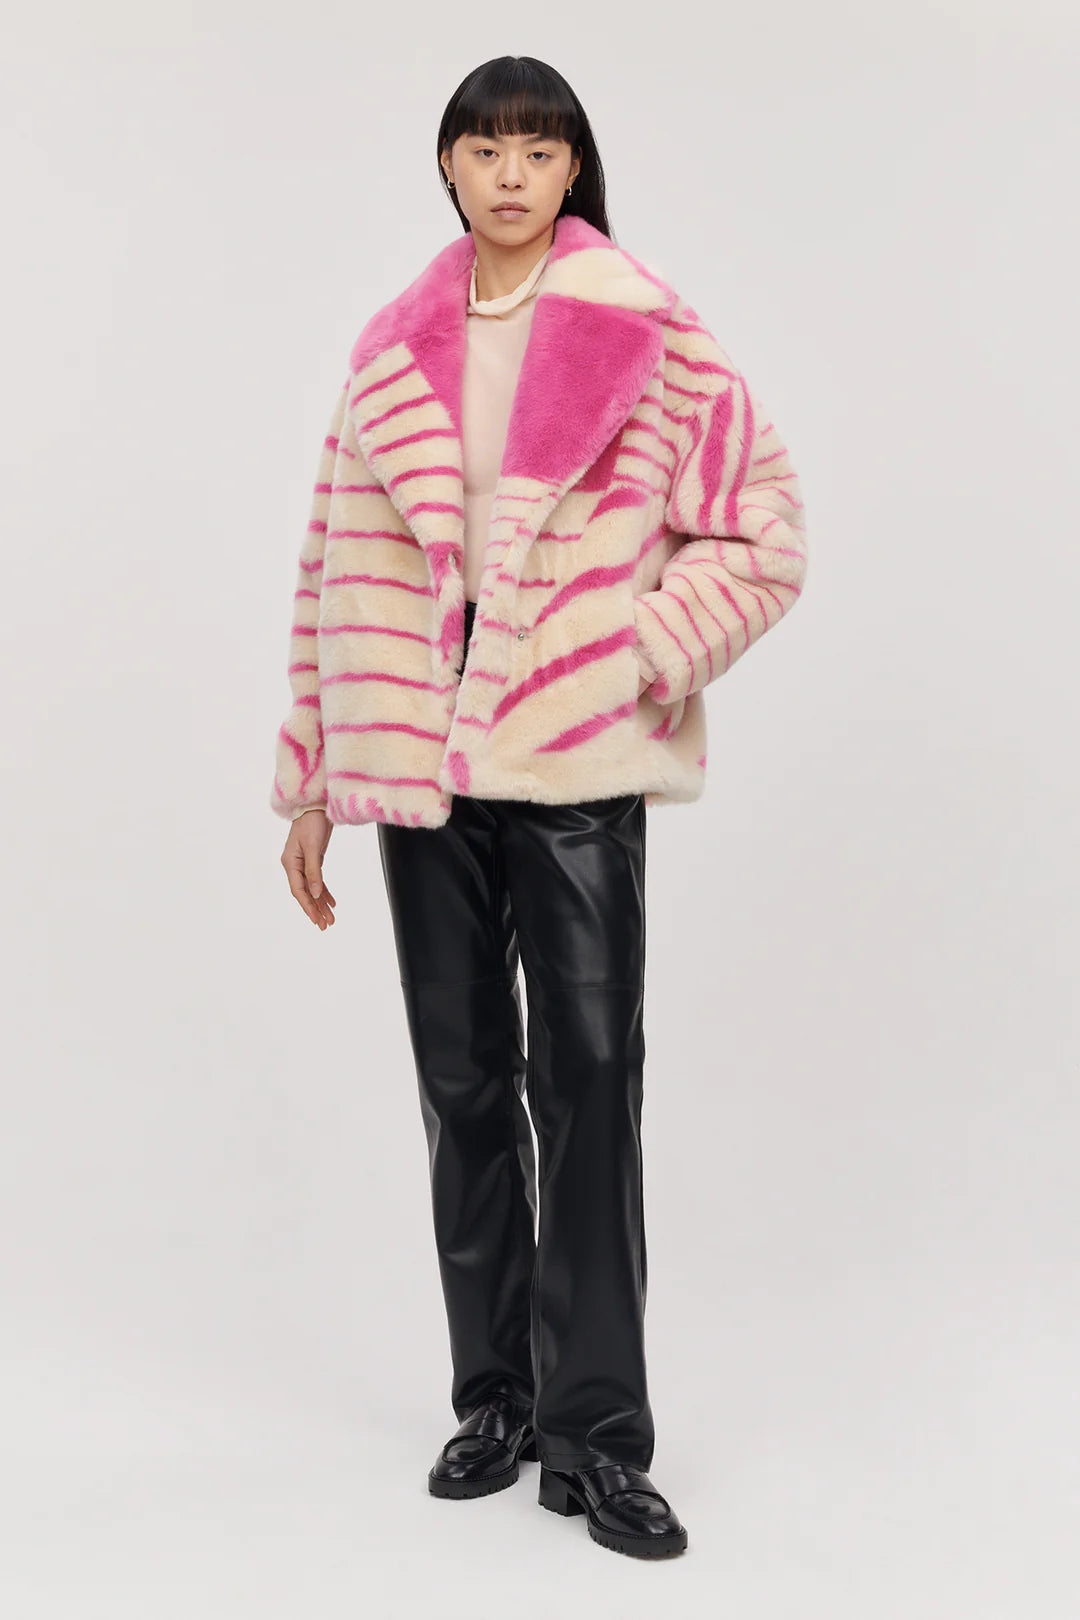 Boxy faux fur pink and ecru striped short jacket with notch lapel V neckline and inseam side pockets